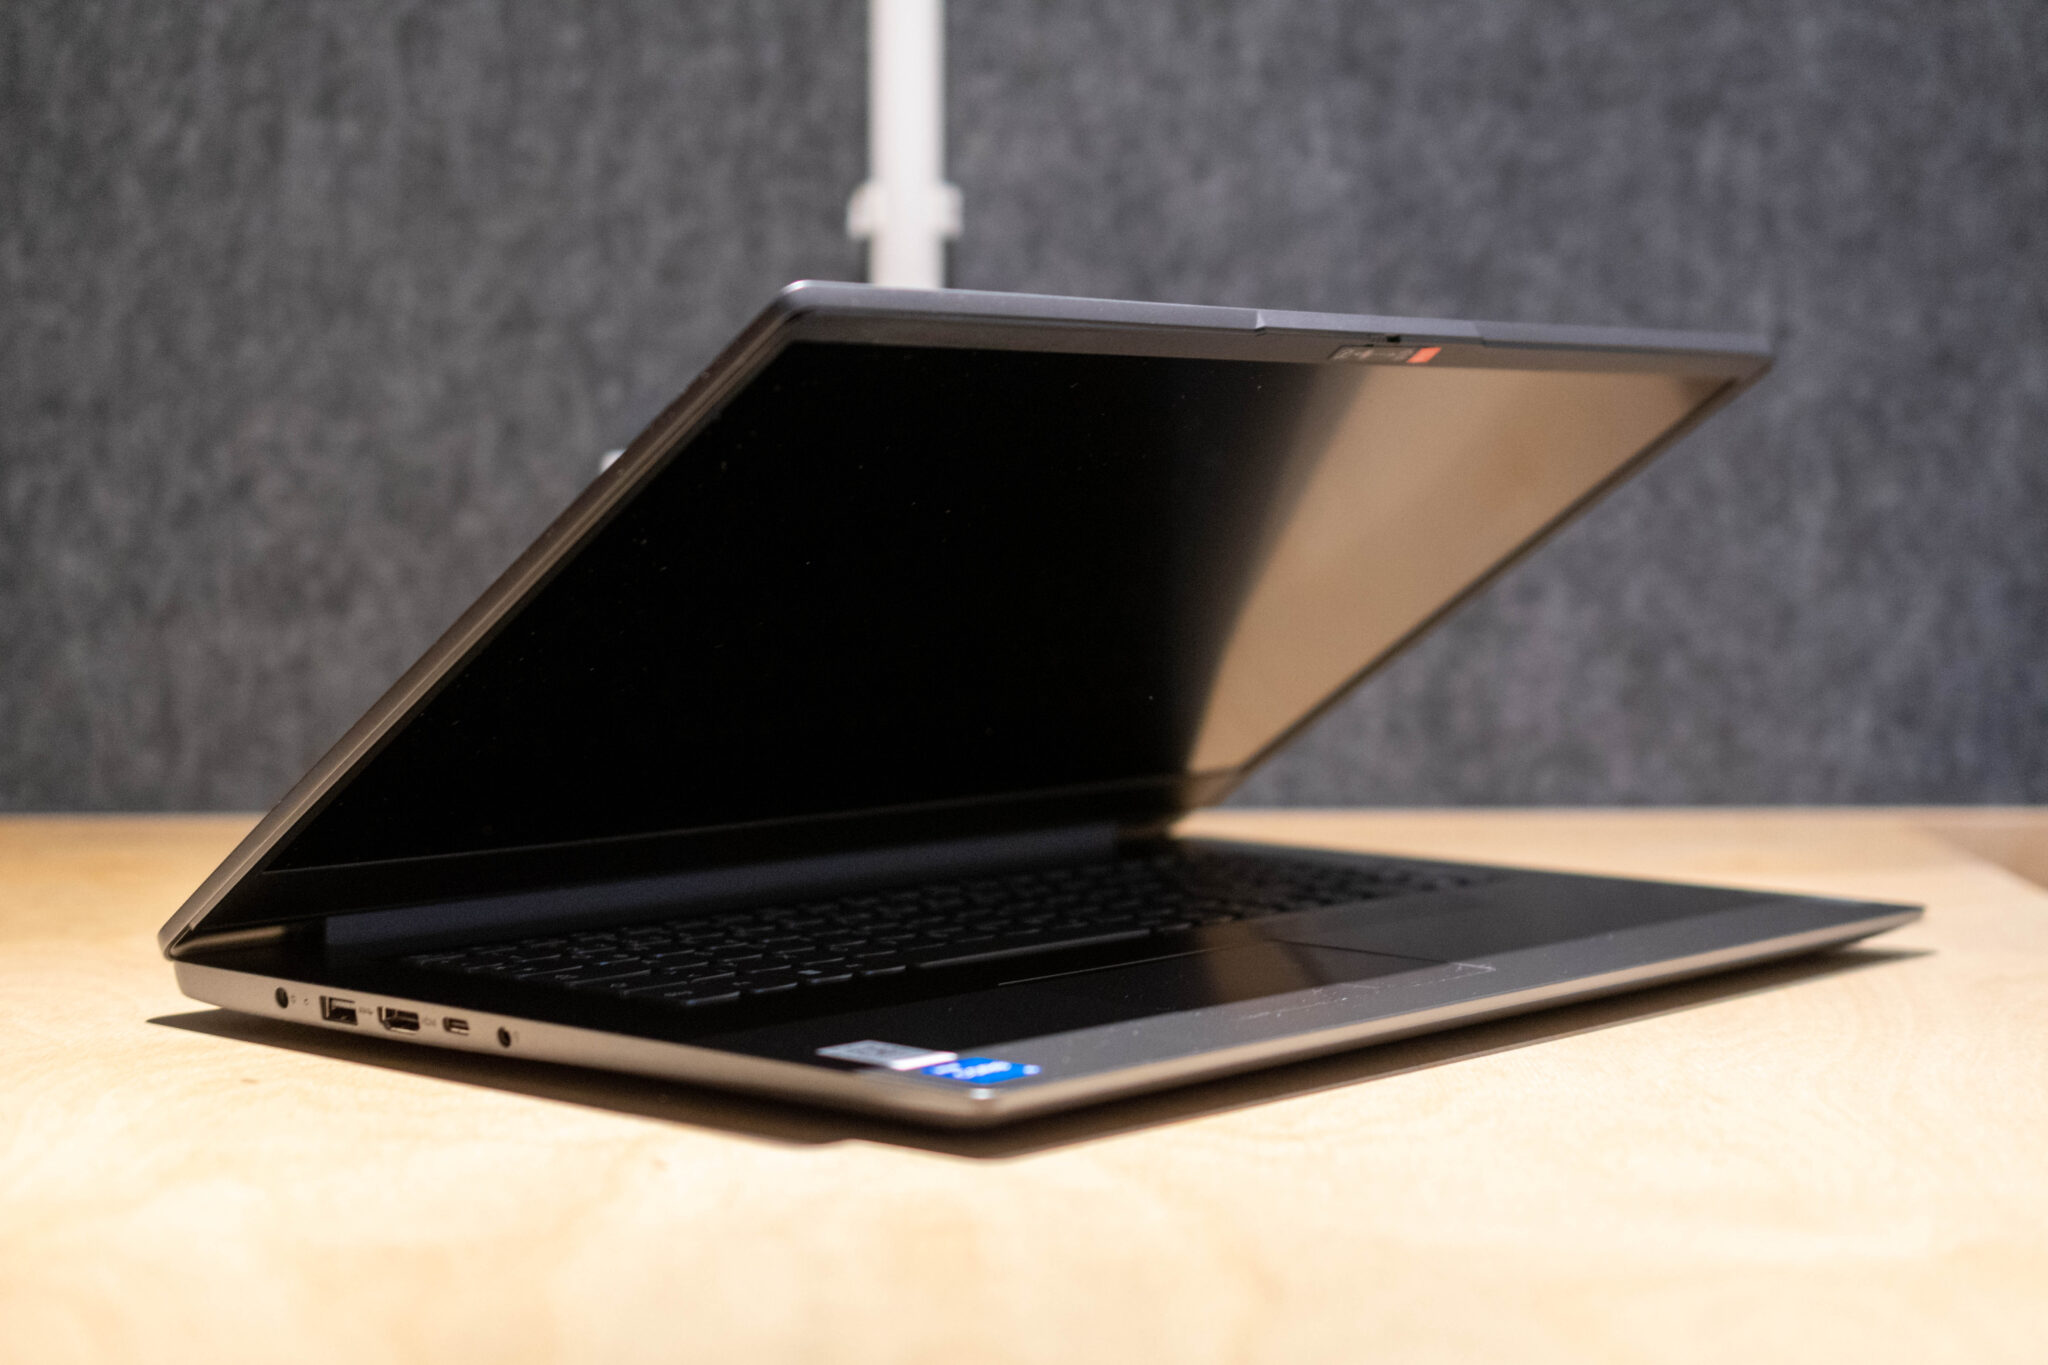 The Lenovo V17 G3 is a successful office notebook